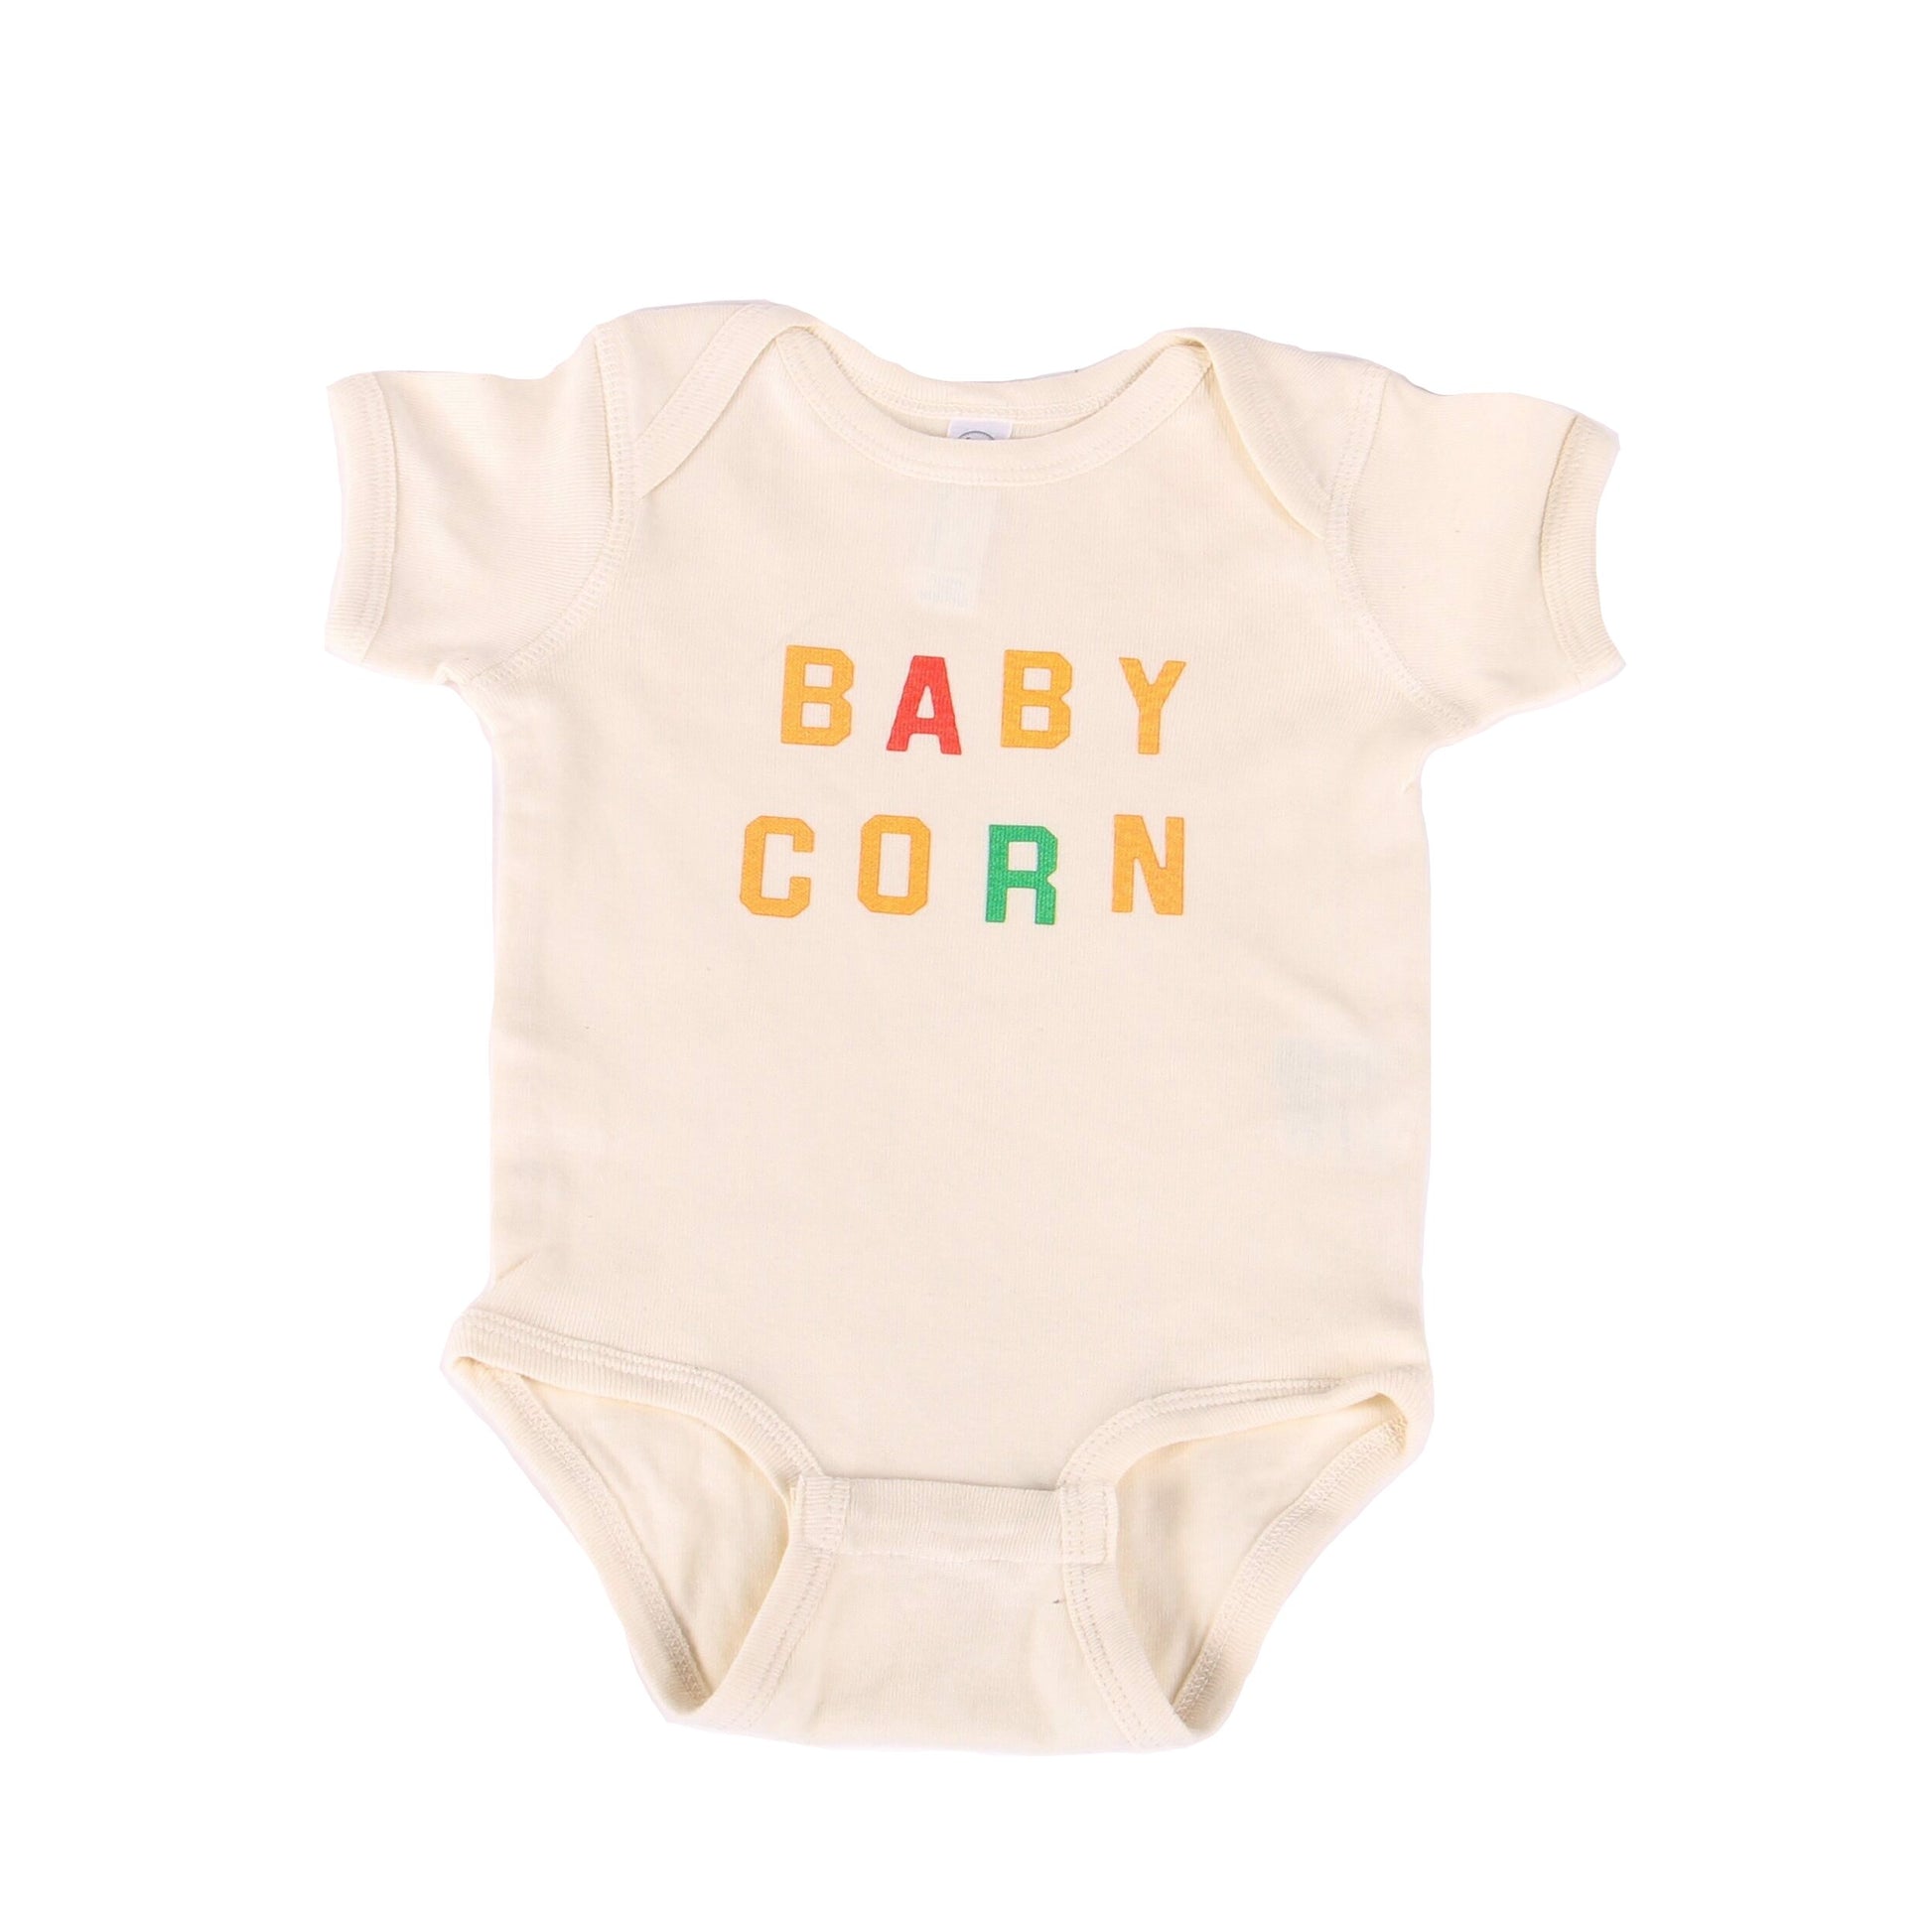 Baby onesie that reads "Baby Corn". Comes in 3 sizes -- 6m, 12m and 18m 